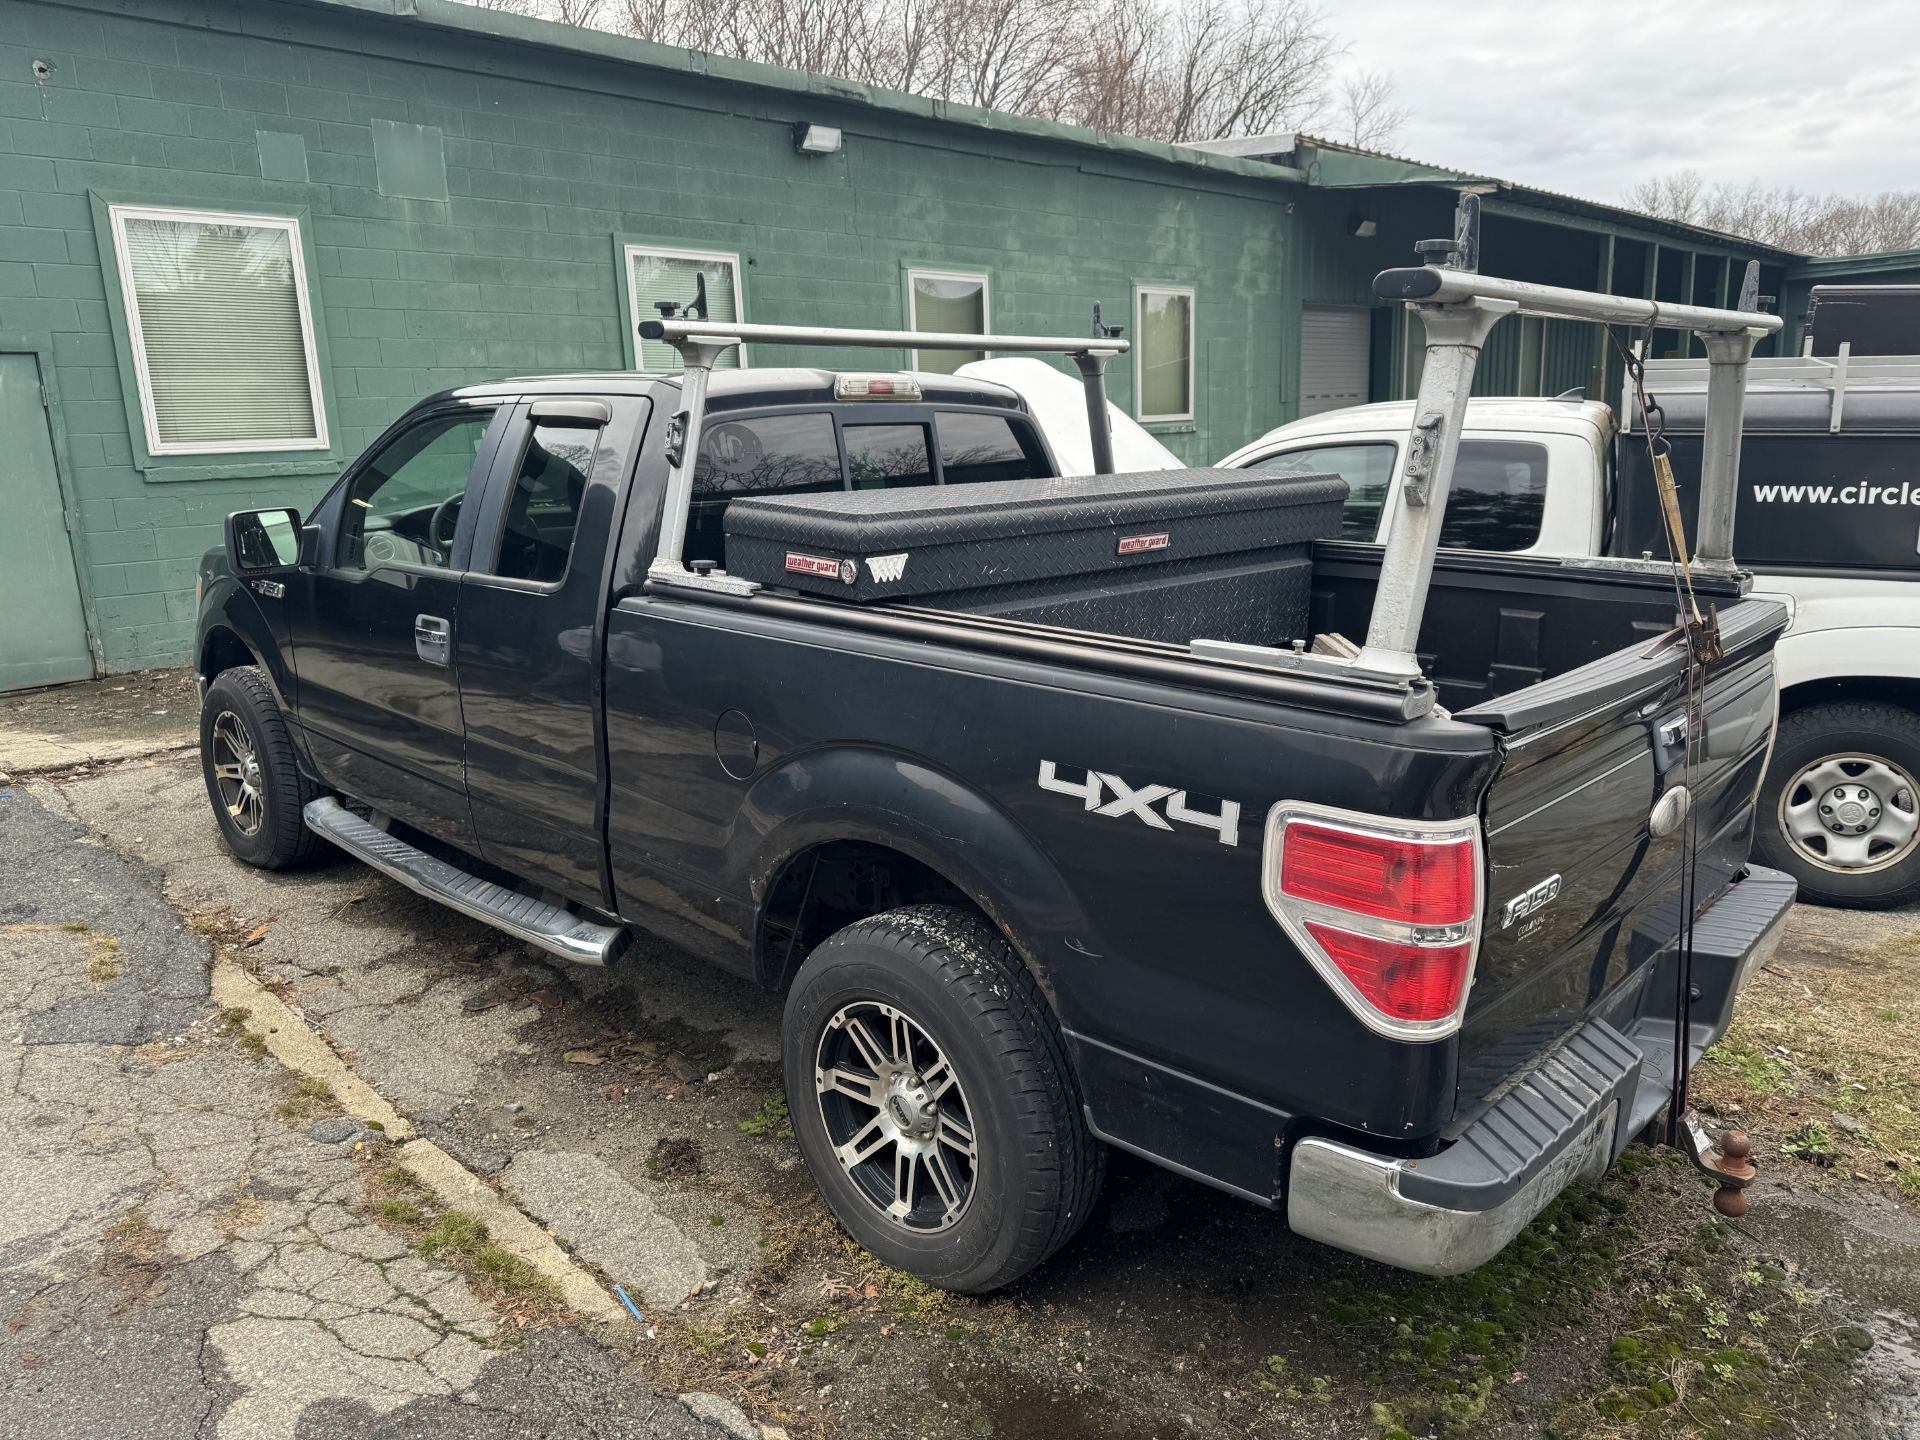 2010 Ford F150 Pickup Truck, , 6' Bed, Ladder Rack, Odom: 336,032, Weather Guard Truck Toolbox. ( - Image 2 of 8